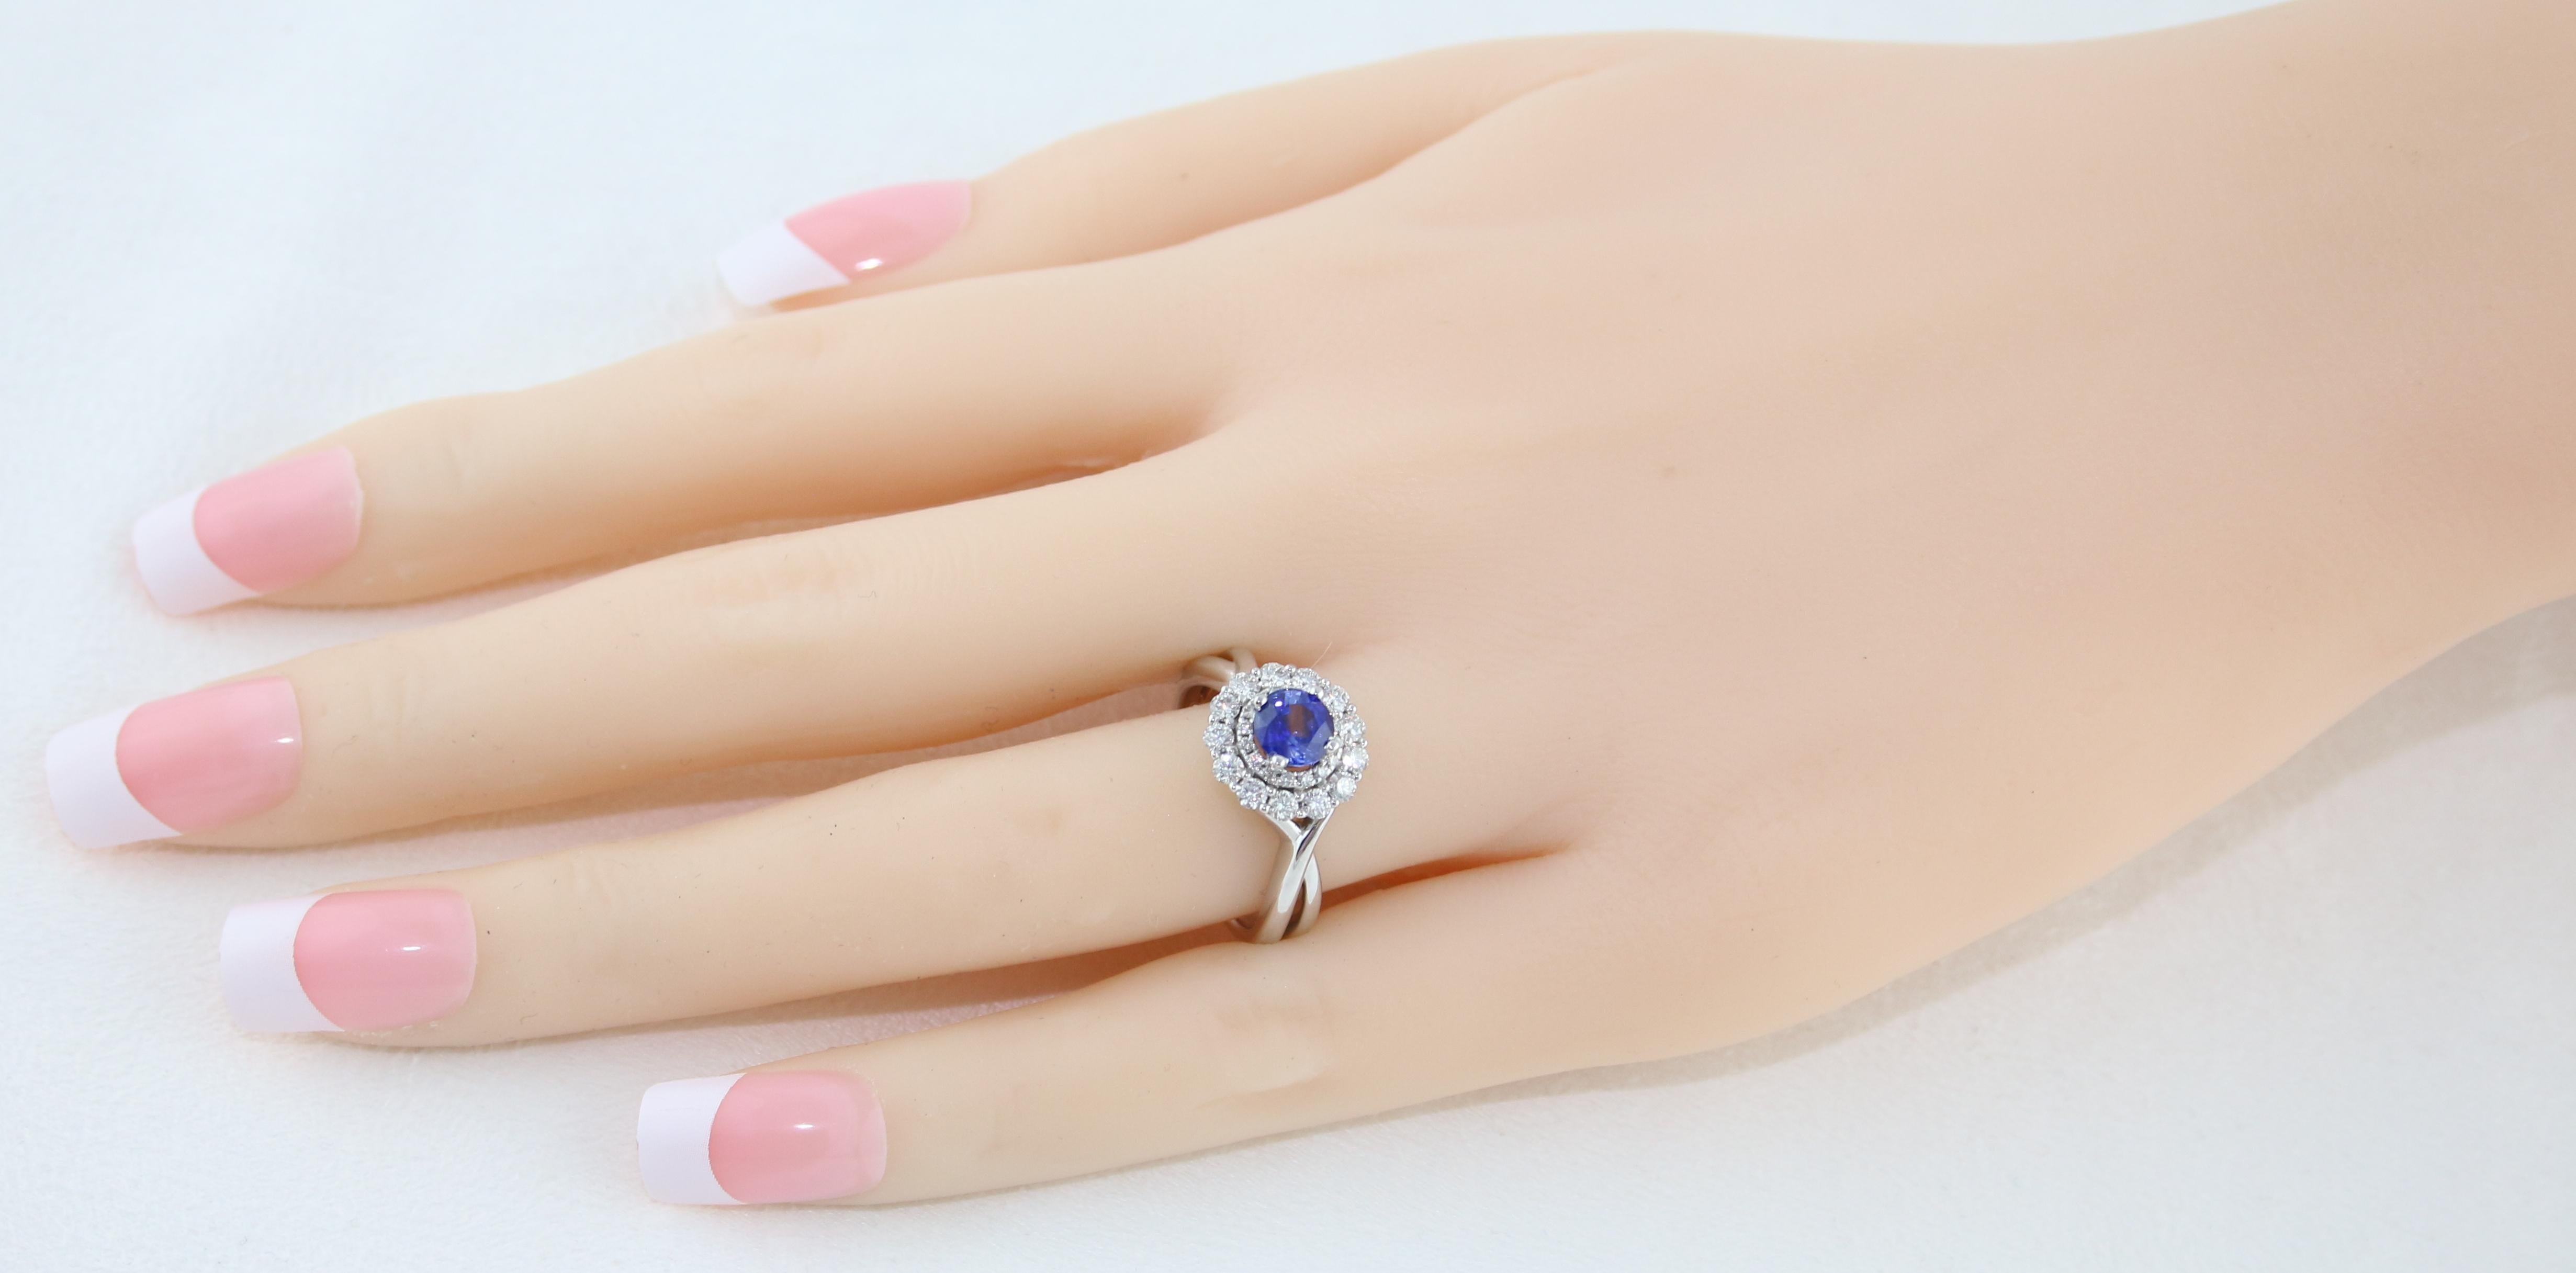 Round Cut AGL Certified 0.84 Carat Round Sapphire Diamond Gold Ring For Sale